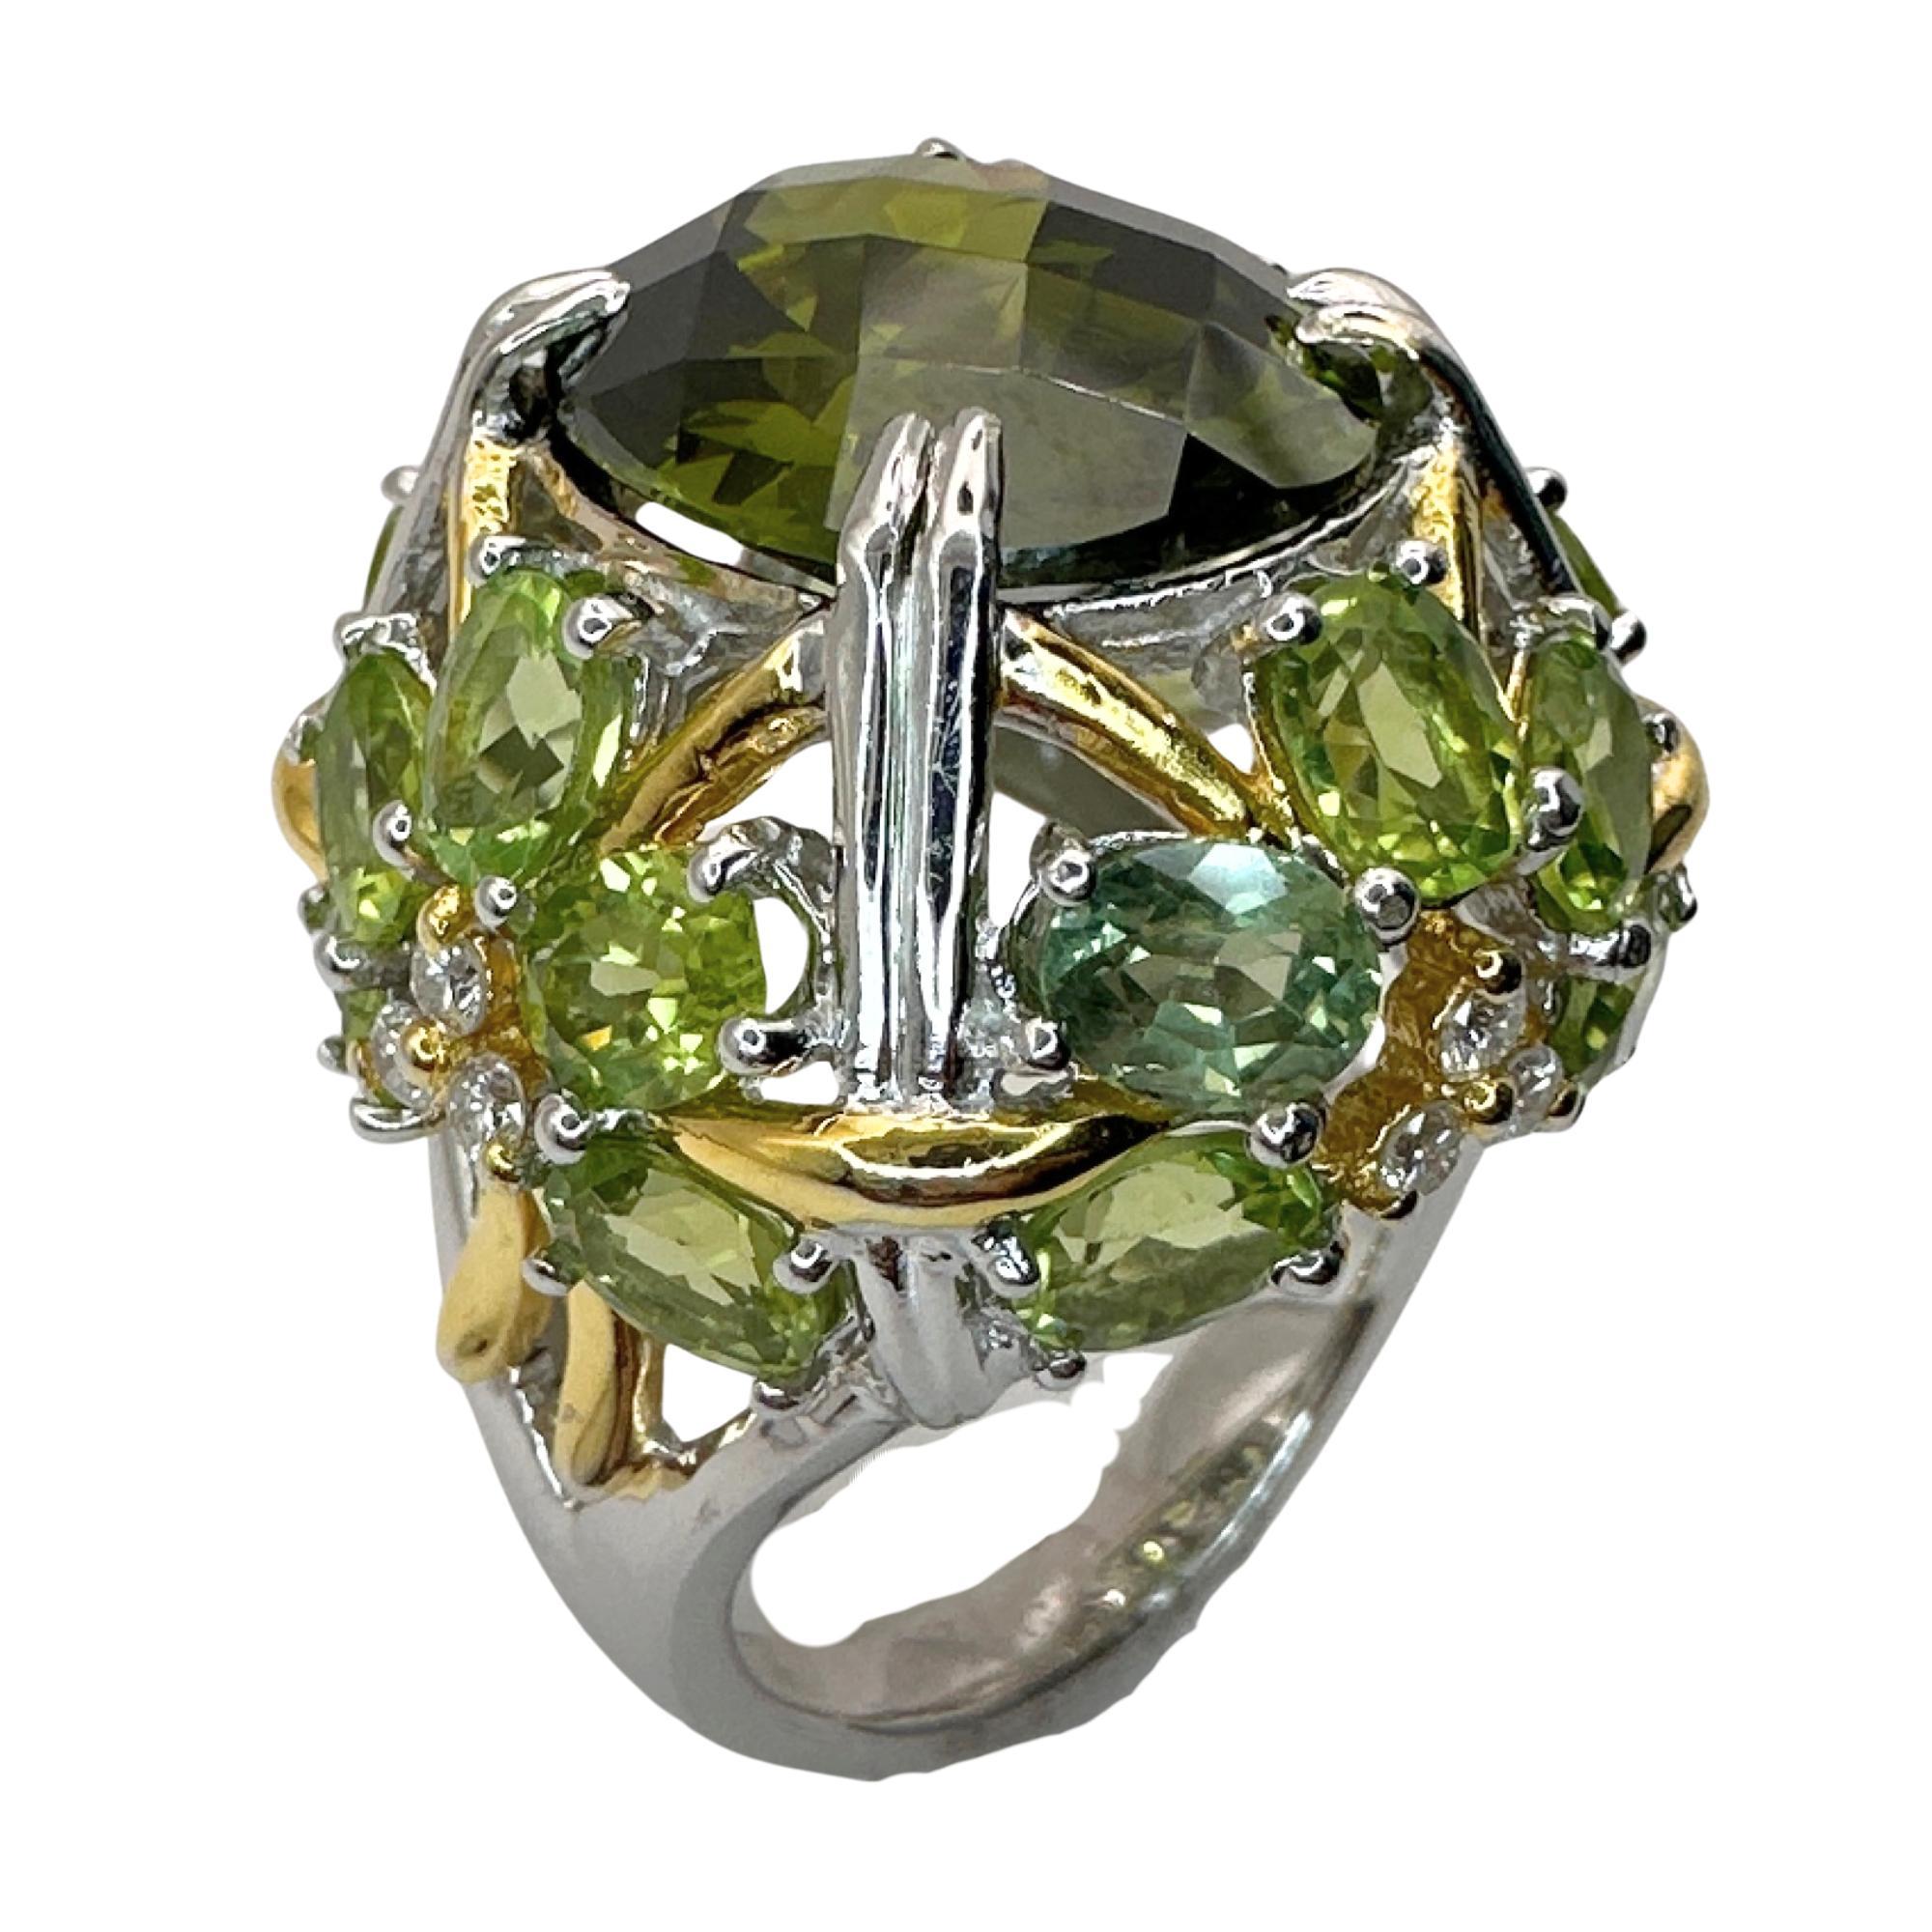 Indulge in luxury with our 18k Diamond and Green Stone Center Cocktail Ring. Crafted with 18k white and yellow gold and adorned with stunning 0.33 carats of diamonds and 22.42 carats of green stones, this ring exudes elegance and sophistication.